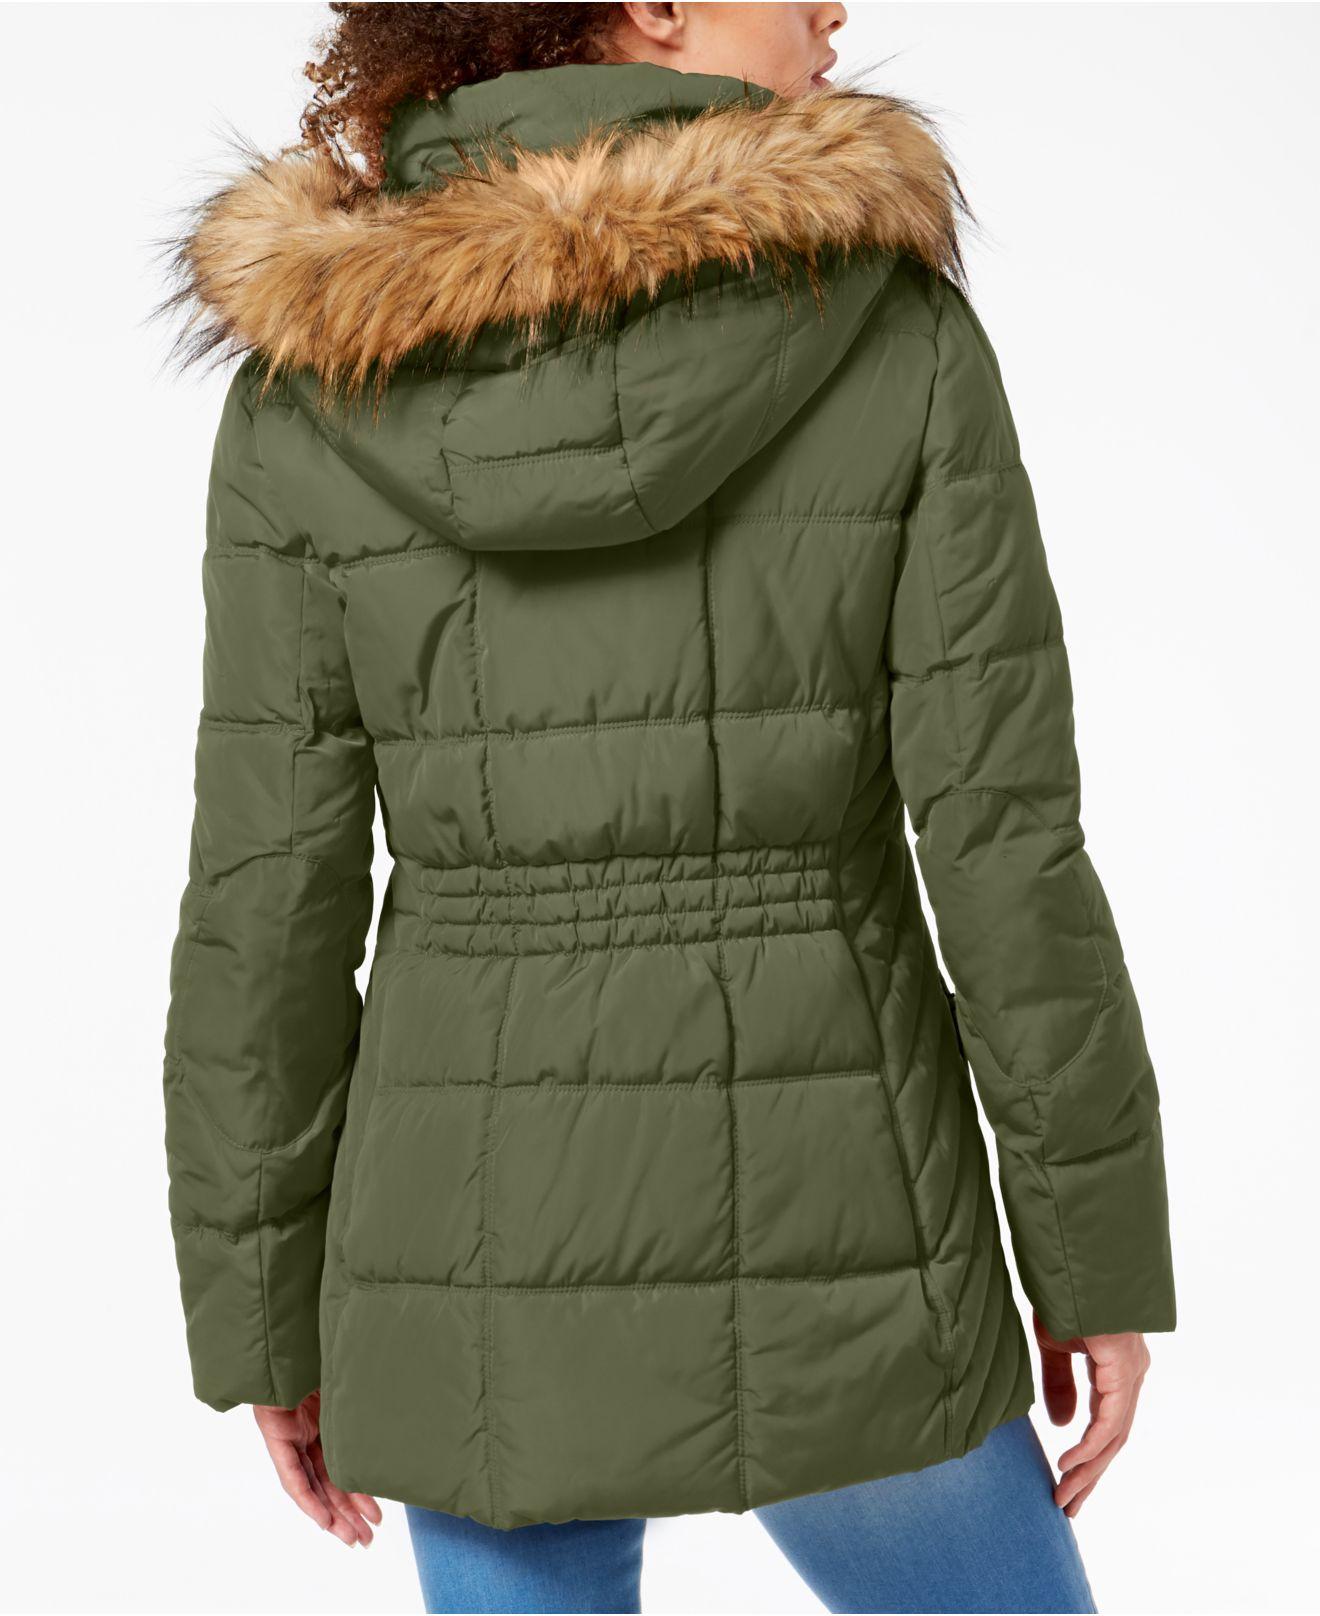 åbning fleksibel Utilfreds Tommy Hilfiger Hooded Faux-fur-trim Puffer Coat, Created For Macy's in Army  Green (Green) - Lyst